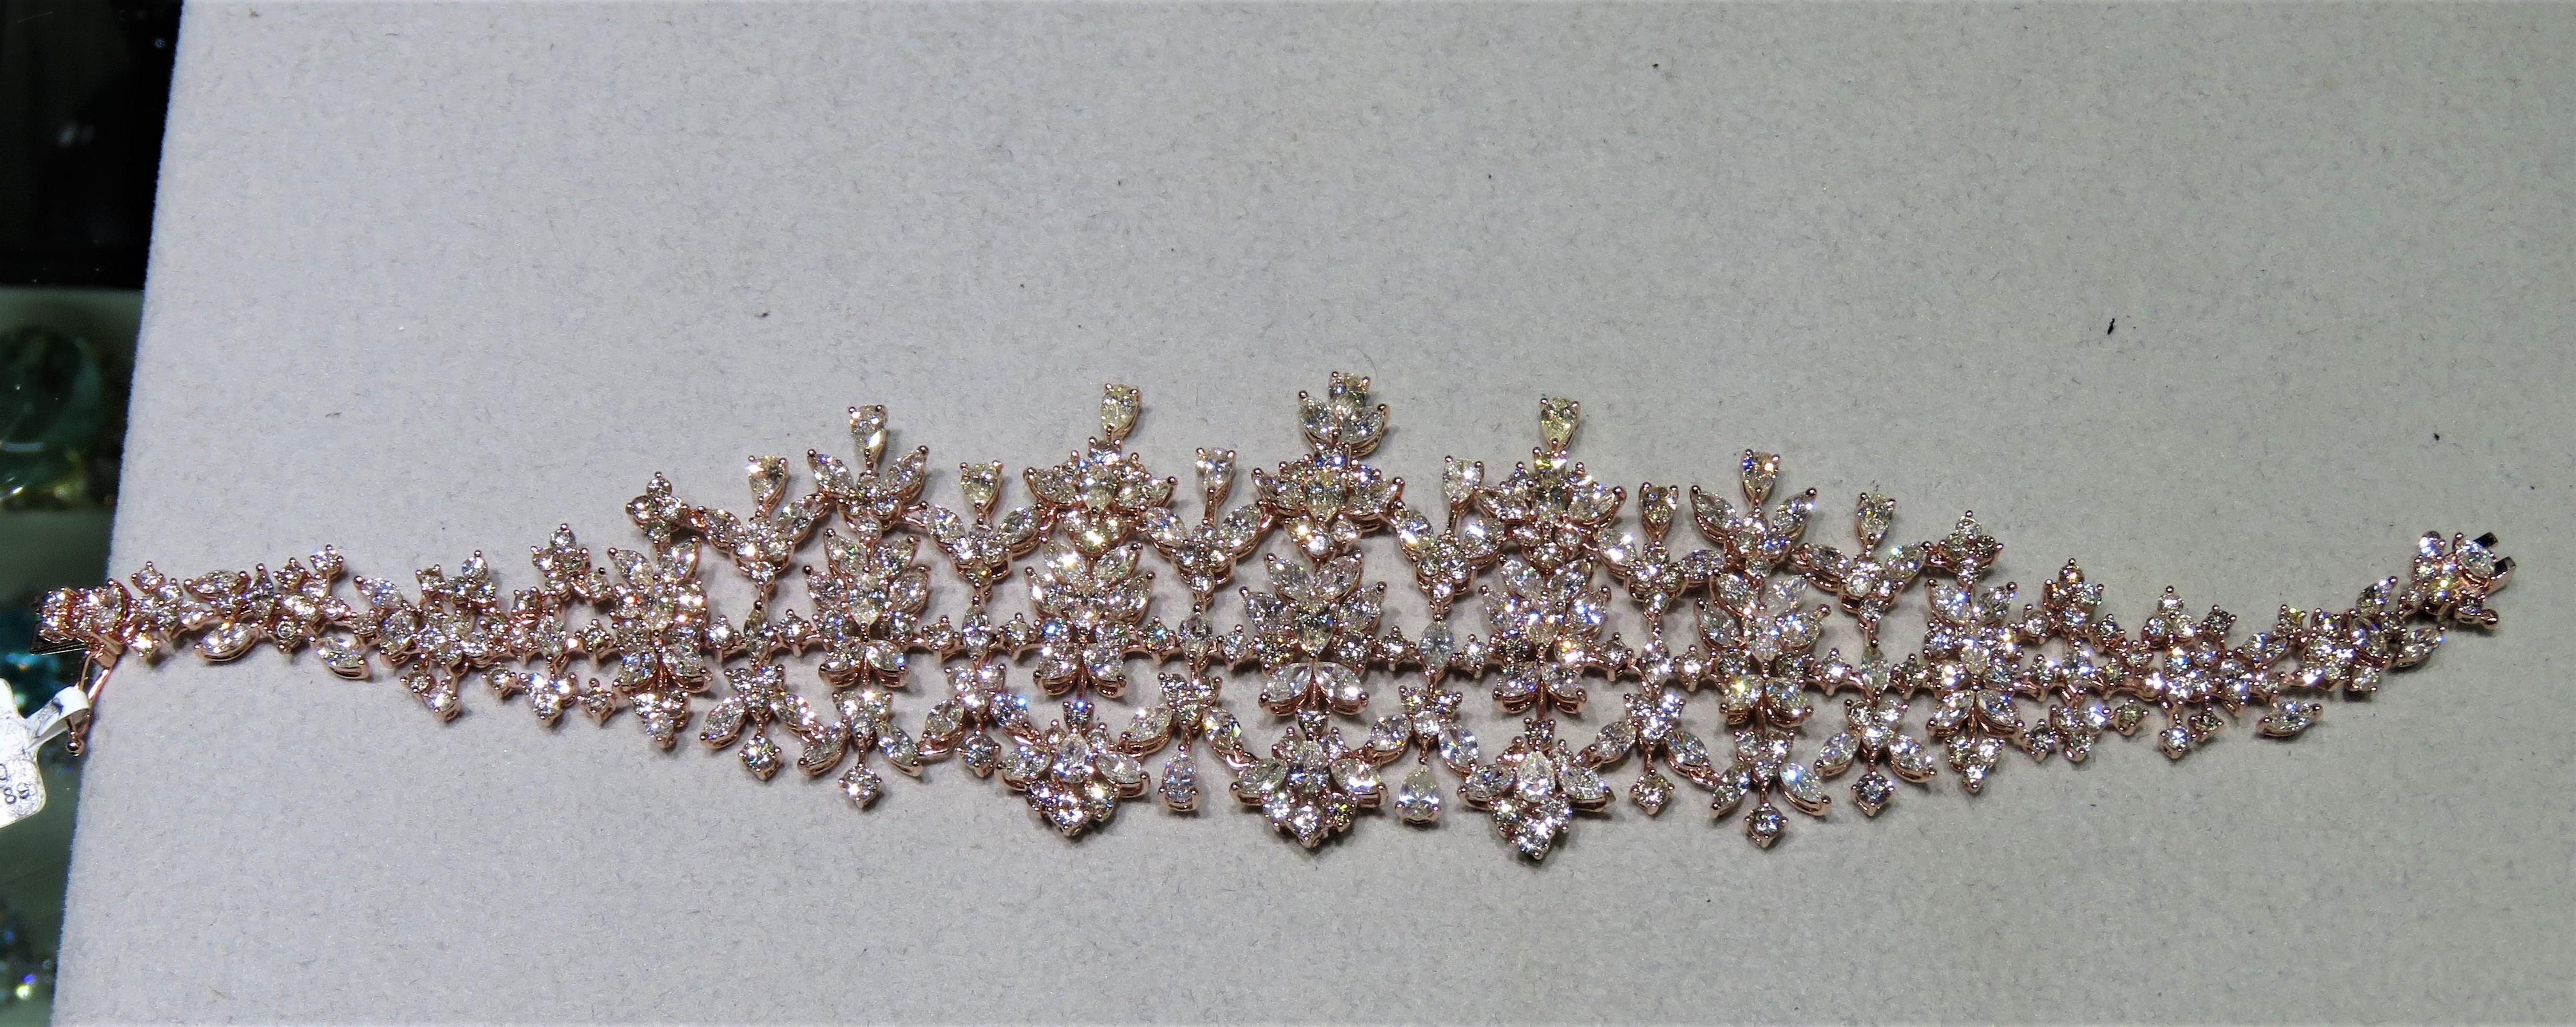 The Following Item we are offering is this Extremely Rare Beautiful 18KT Gold Fine Rare Large Wide Fancy Diamond Cluster Bracelet. This Magnificent Bracelet is comprised of Rare Fine Fancy Diamonds in the Form of Flowers!!! T.C.W. Approx 20CTS!!